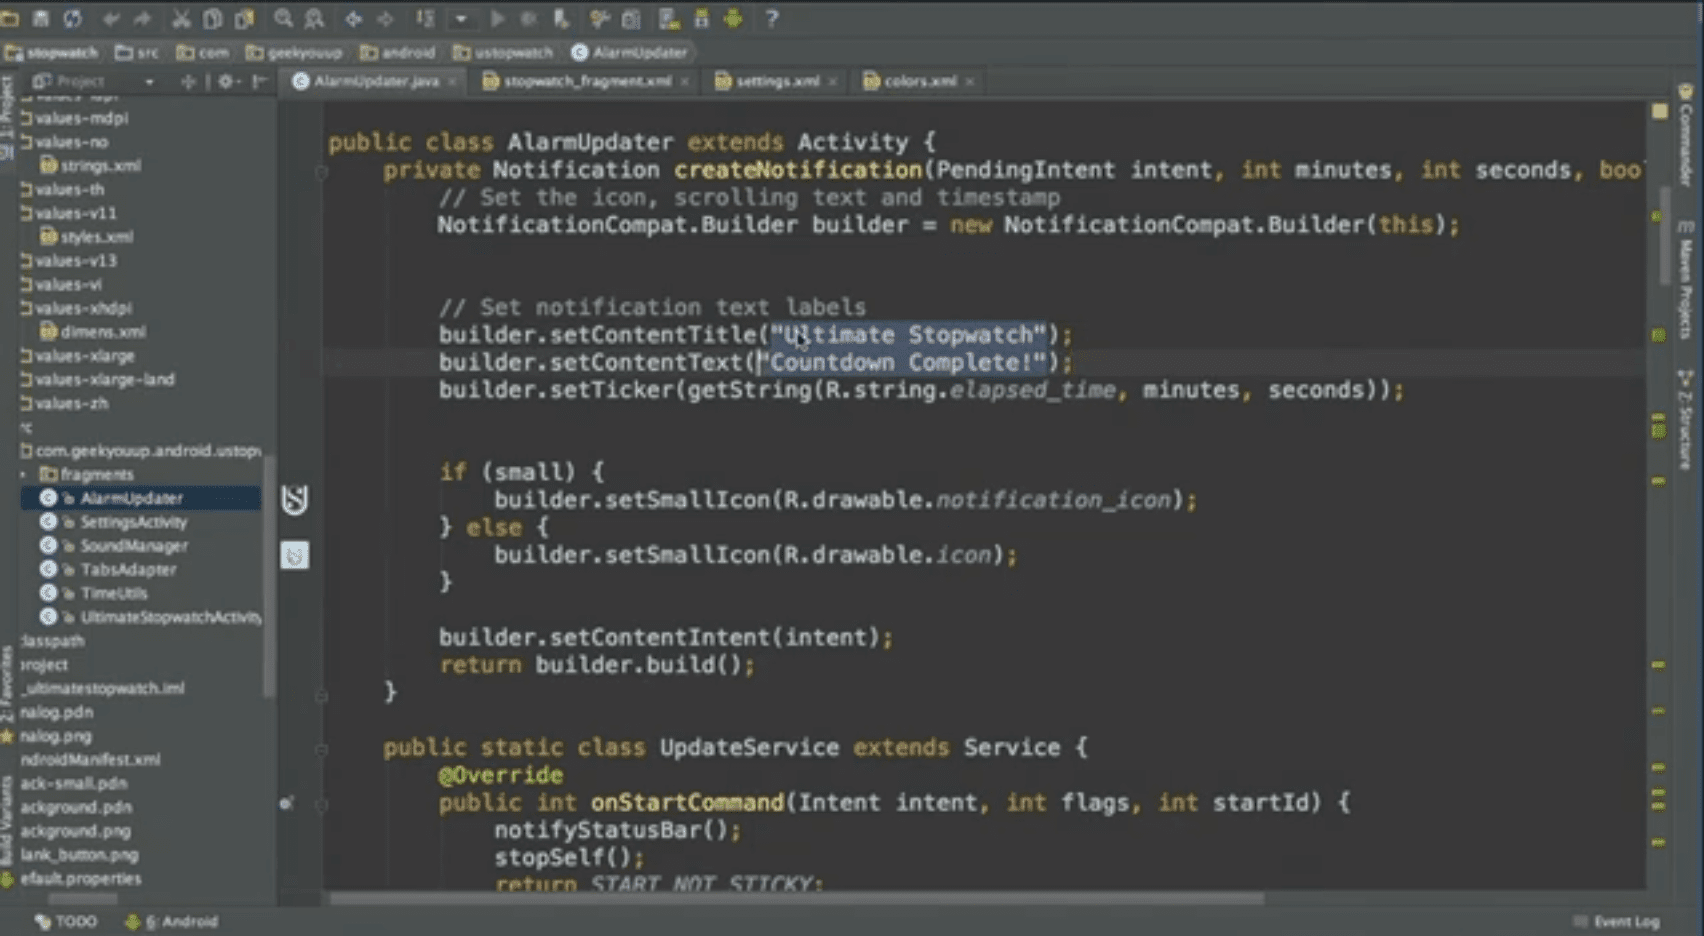 Live string resource preview makes code more readable